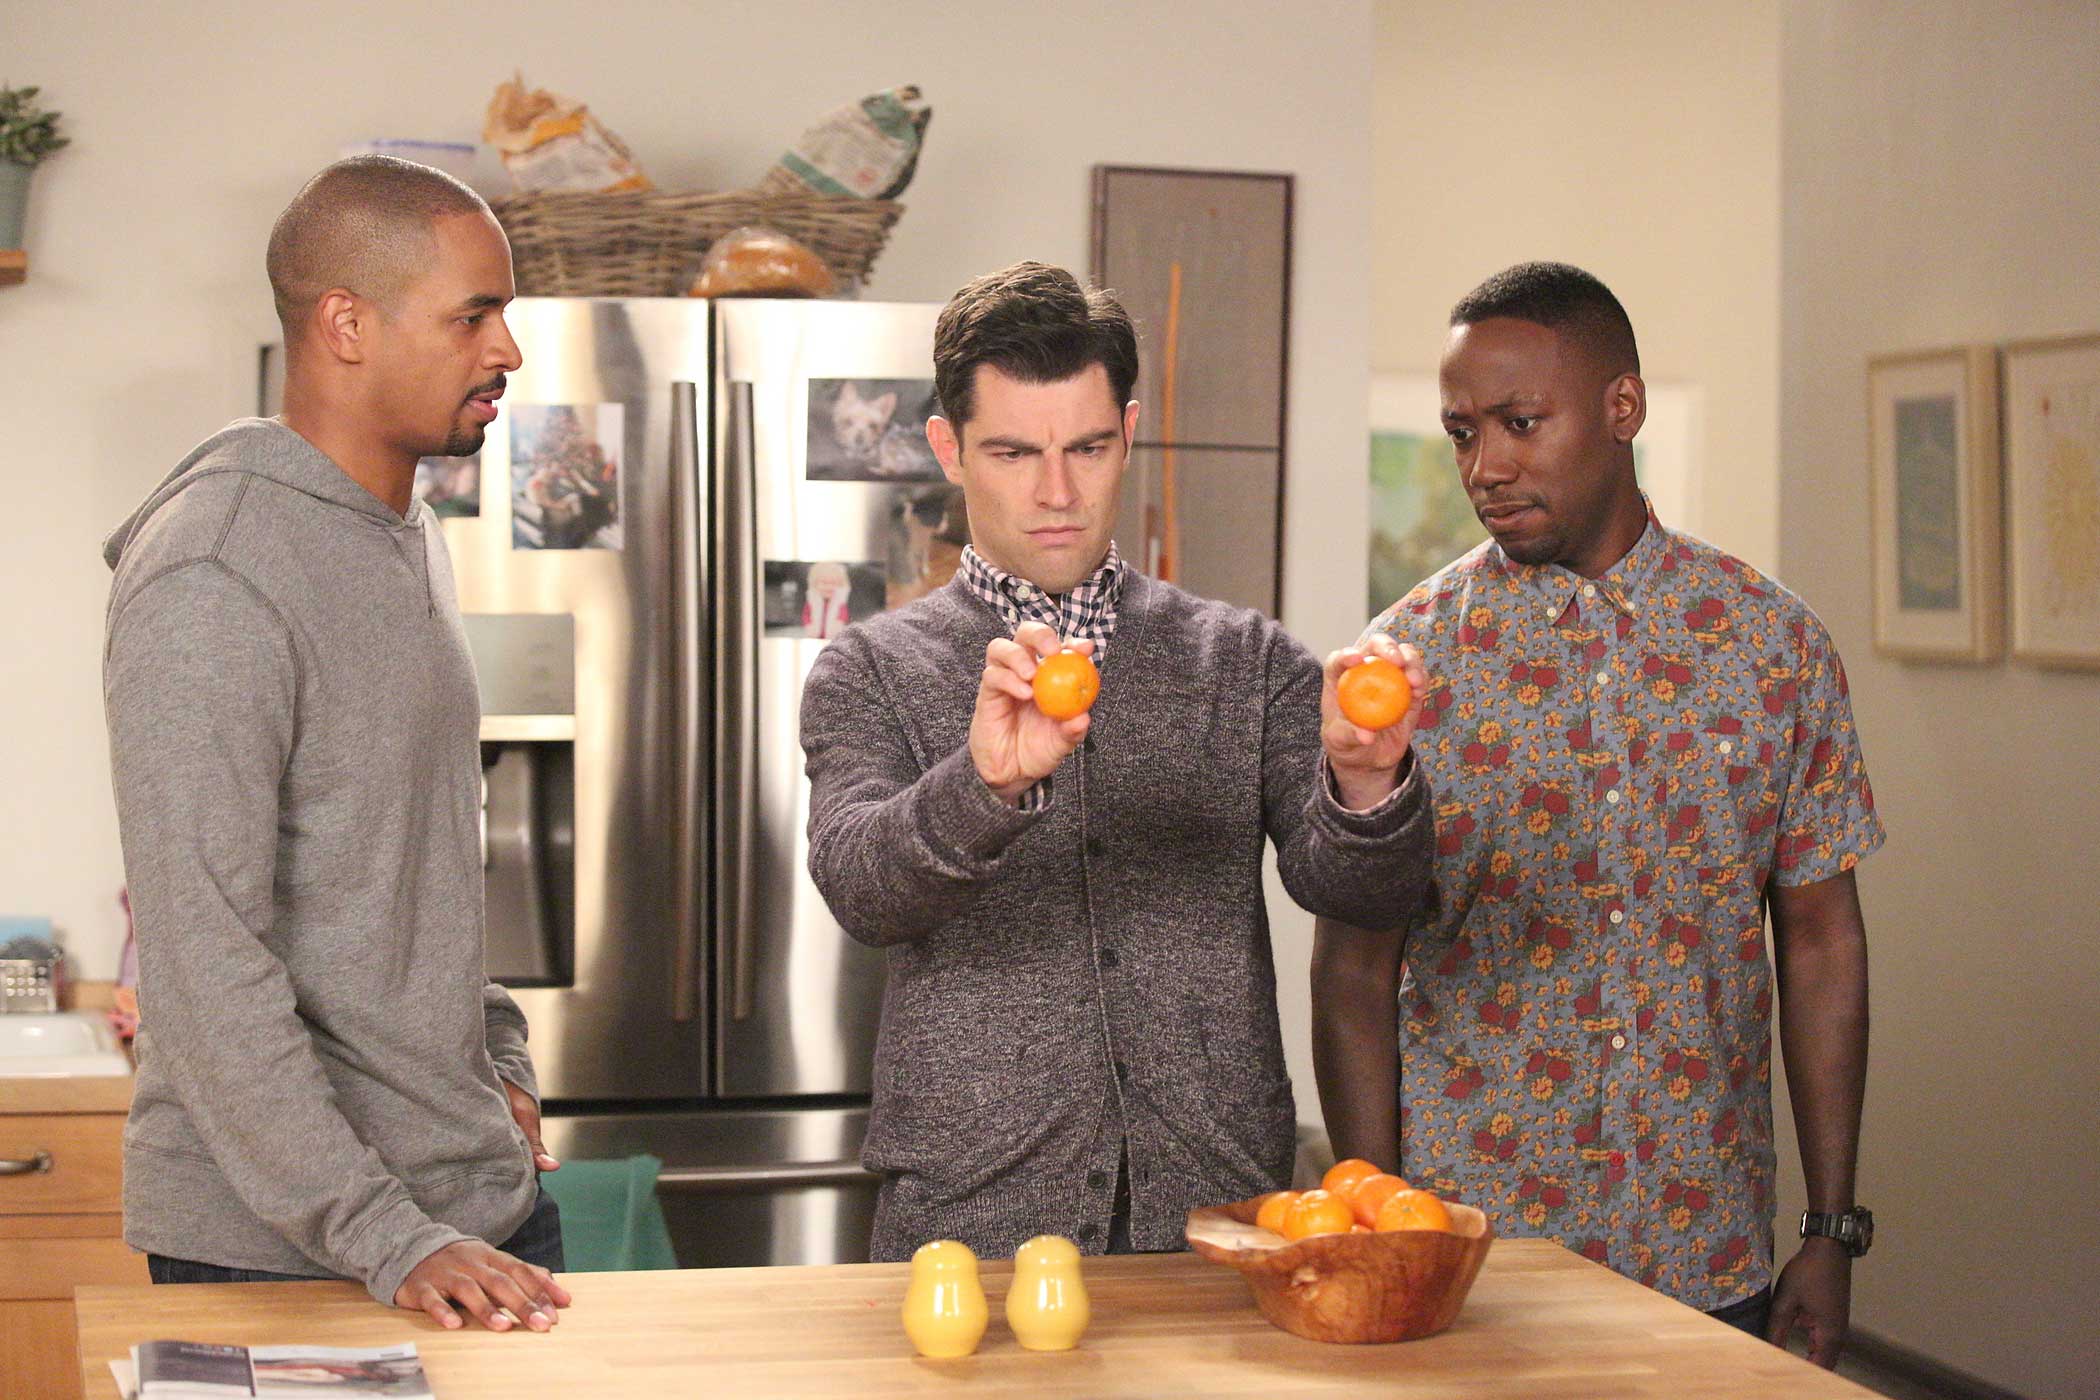 NEW GIRL:   Schmidt (Max Greenfield, C), Coach (Damon Wayans, Jr., L) and Winston (Lamorne Morris, R) visit their neighbors in the "Goldmine" episode of NEW GIRL airing Tuesday, Nov. 11 (9:00-9:30 PM ET/PT) on FOX.  ©2014 Fox Broadcasting Co.  Cr:  Adam Taylor/FOX